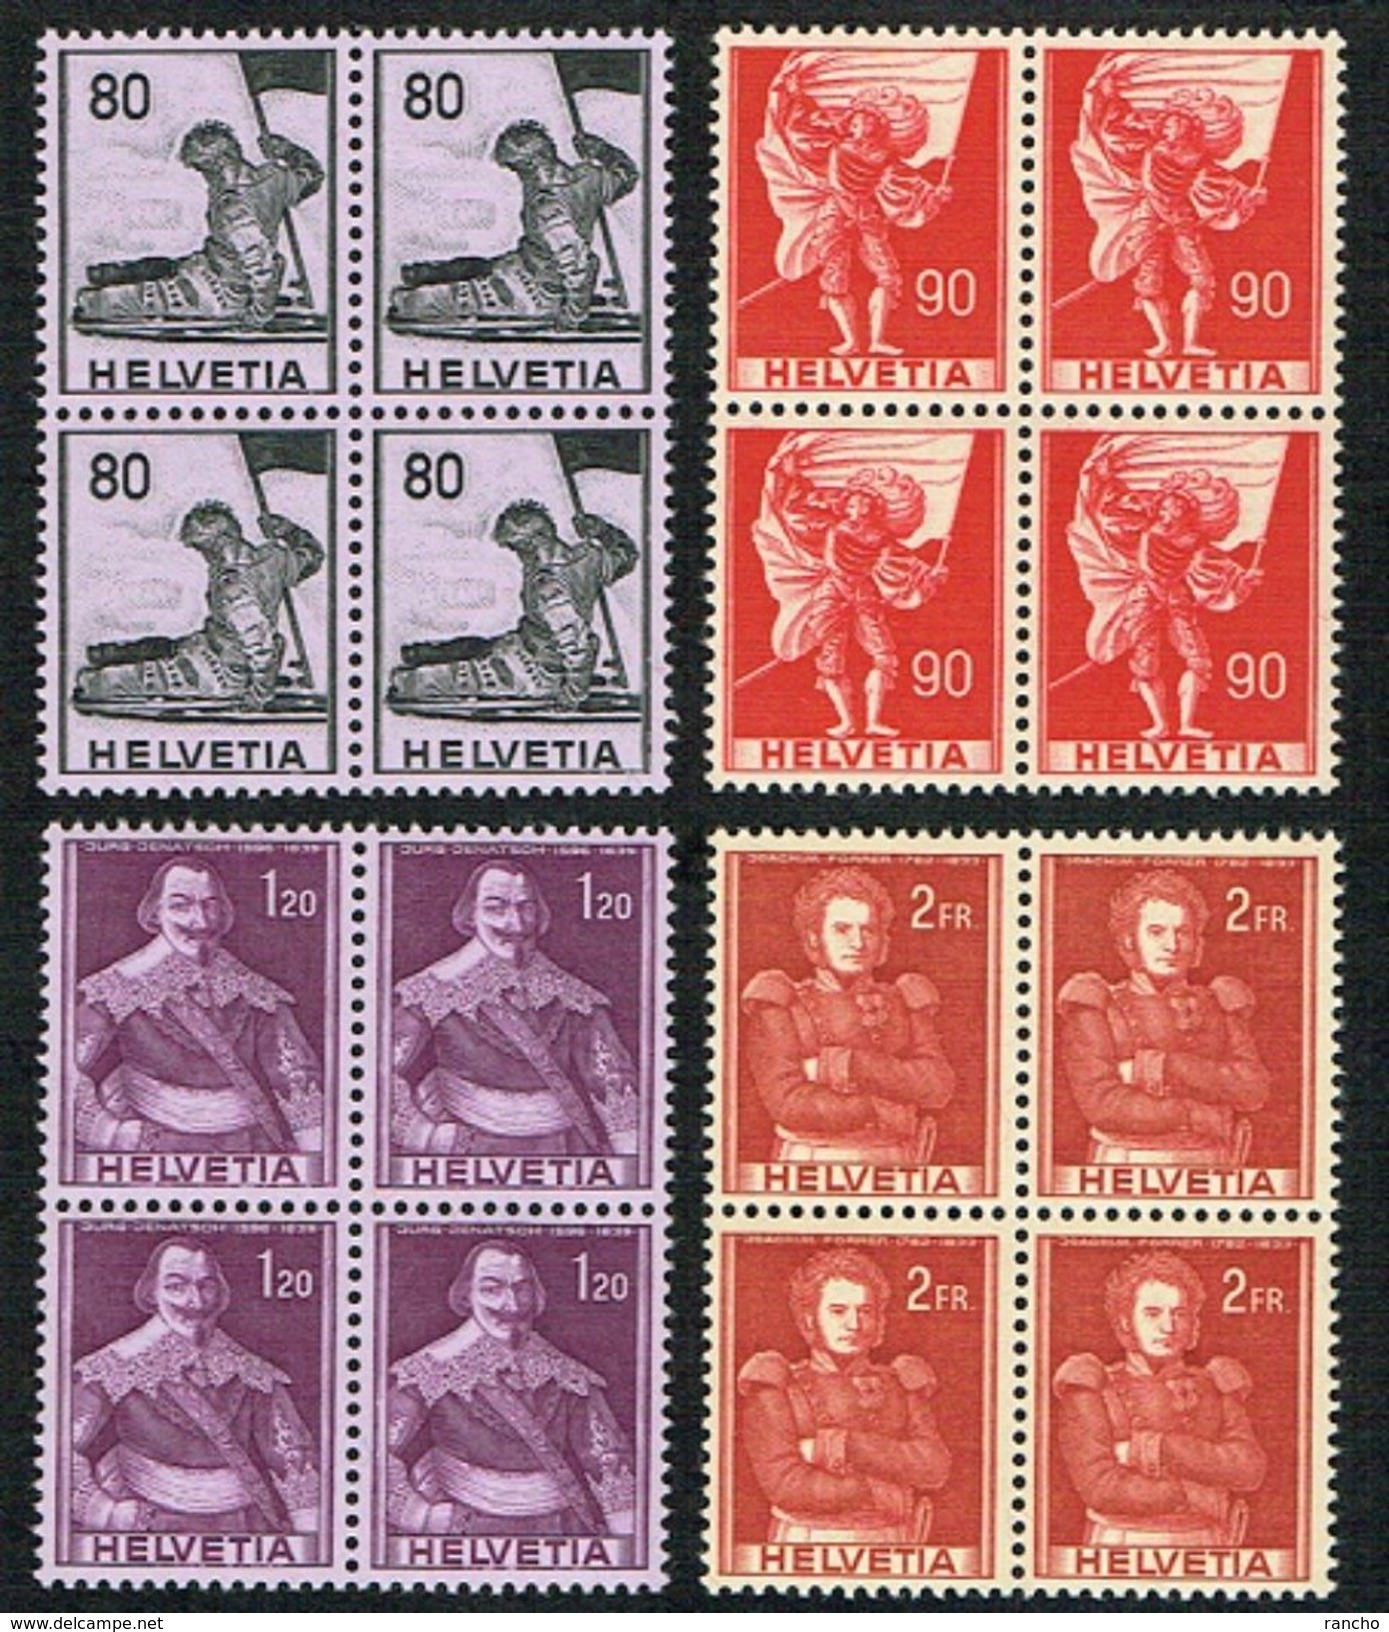 ** SERIE BLOCS DE 4 TIMBRES COLLECTIONS NEUFS 1958 C/.S.B.K. Nr:339/342. Y&TELLIER Nr:612/615. MICHEL Nr:683/686.** - Unused Stamps